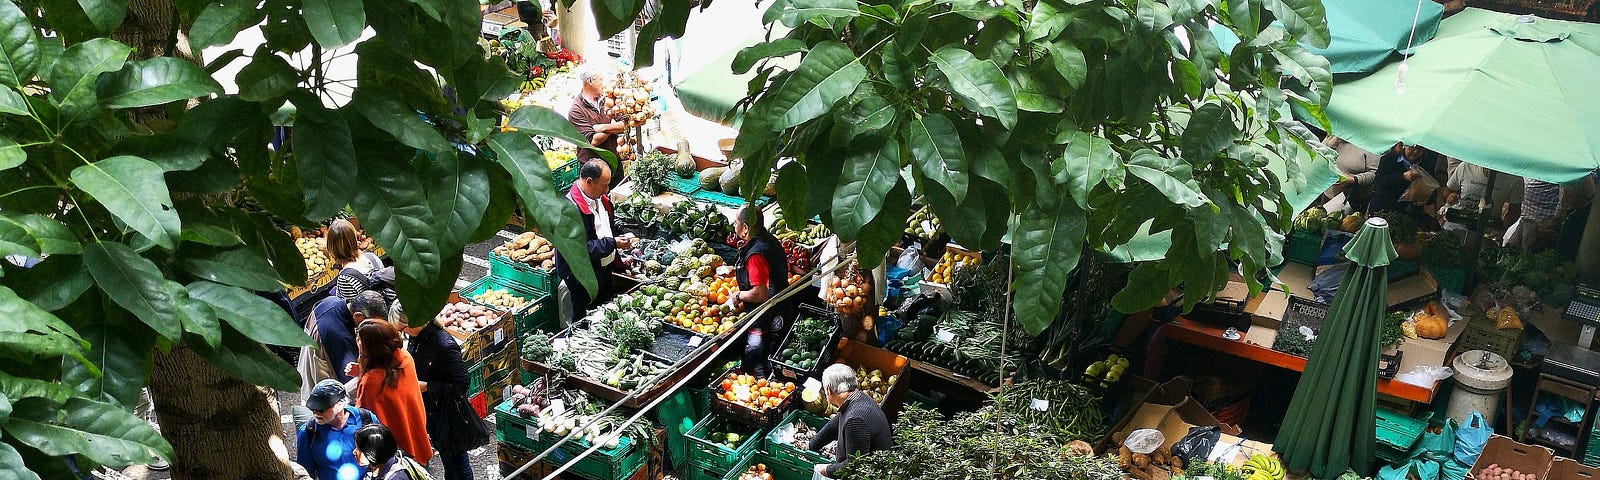 Aerial view of an outdoor street market selling fresh fruit and vegatables